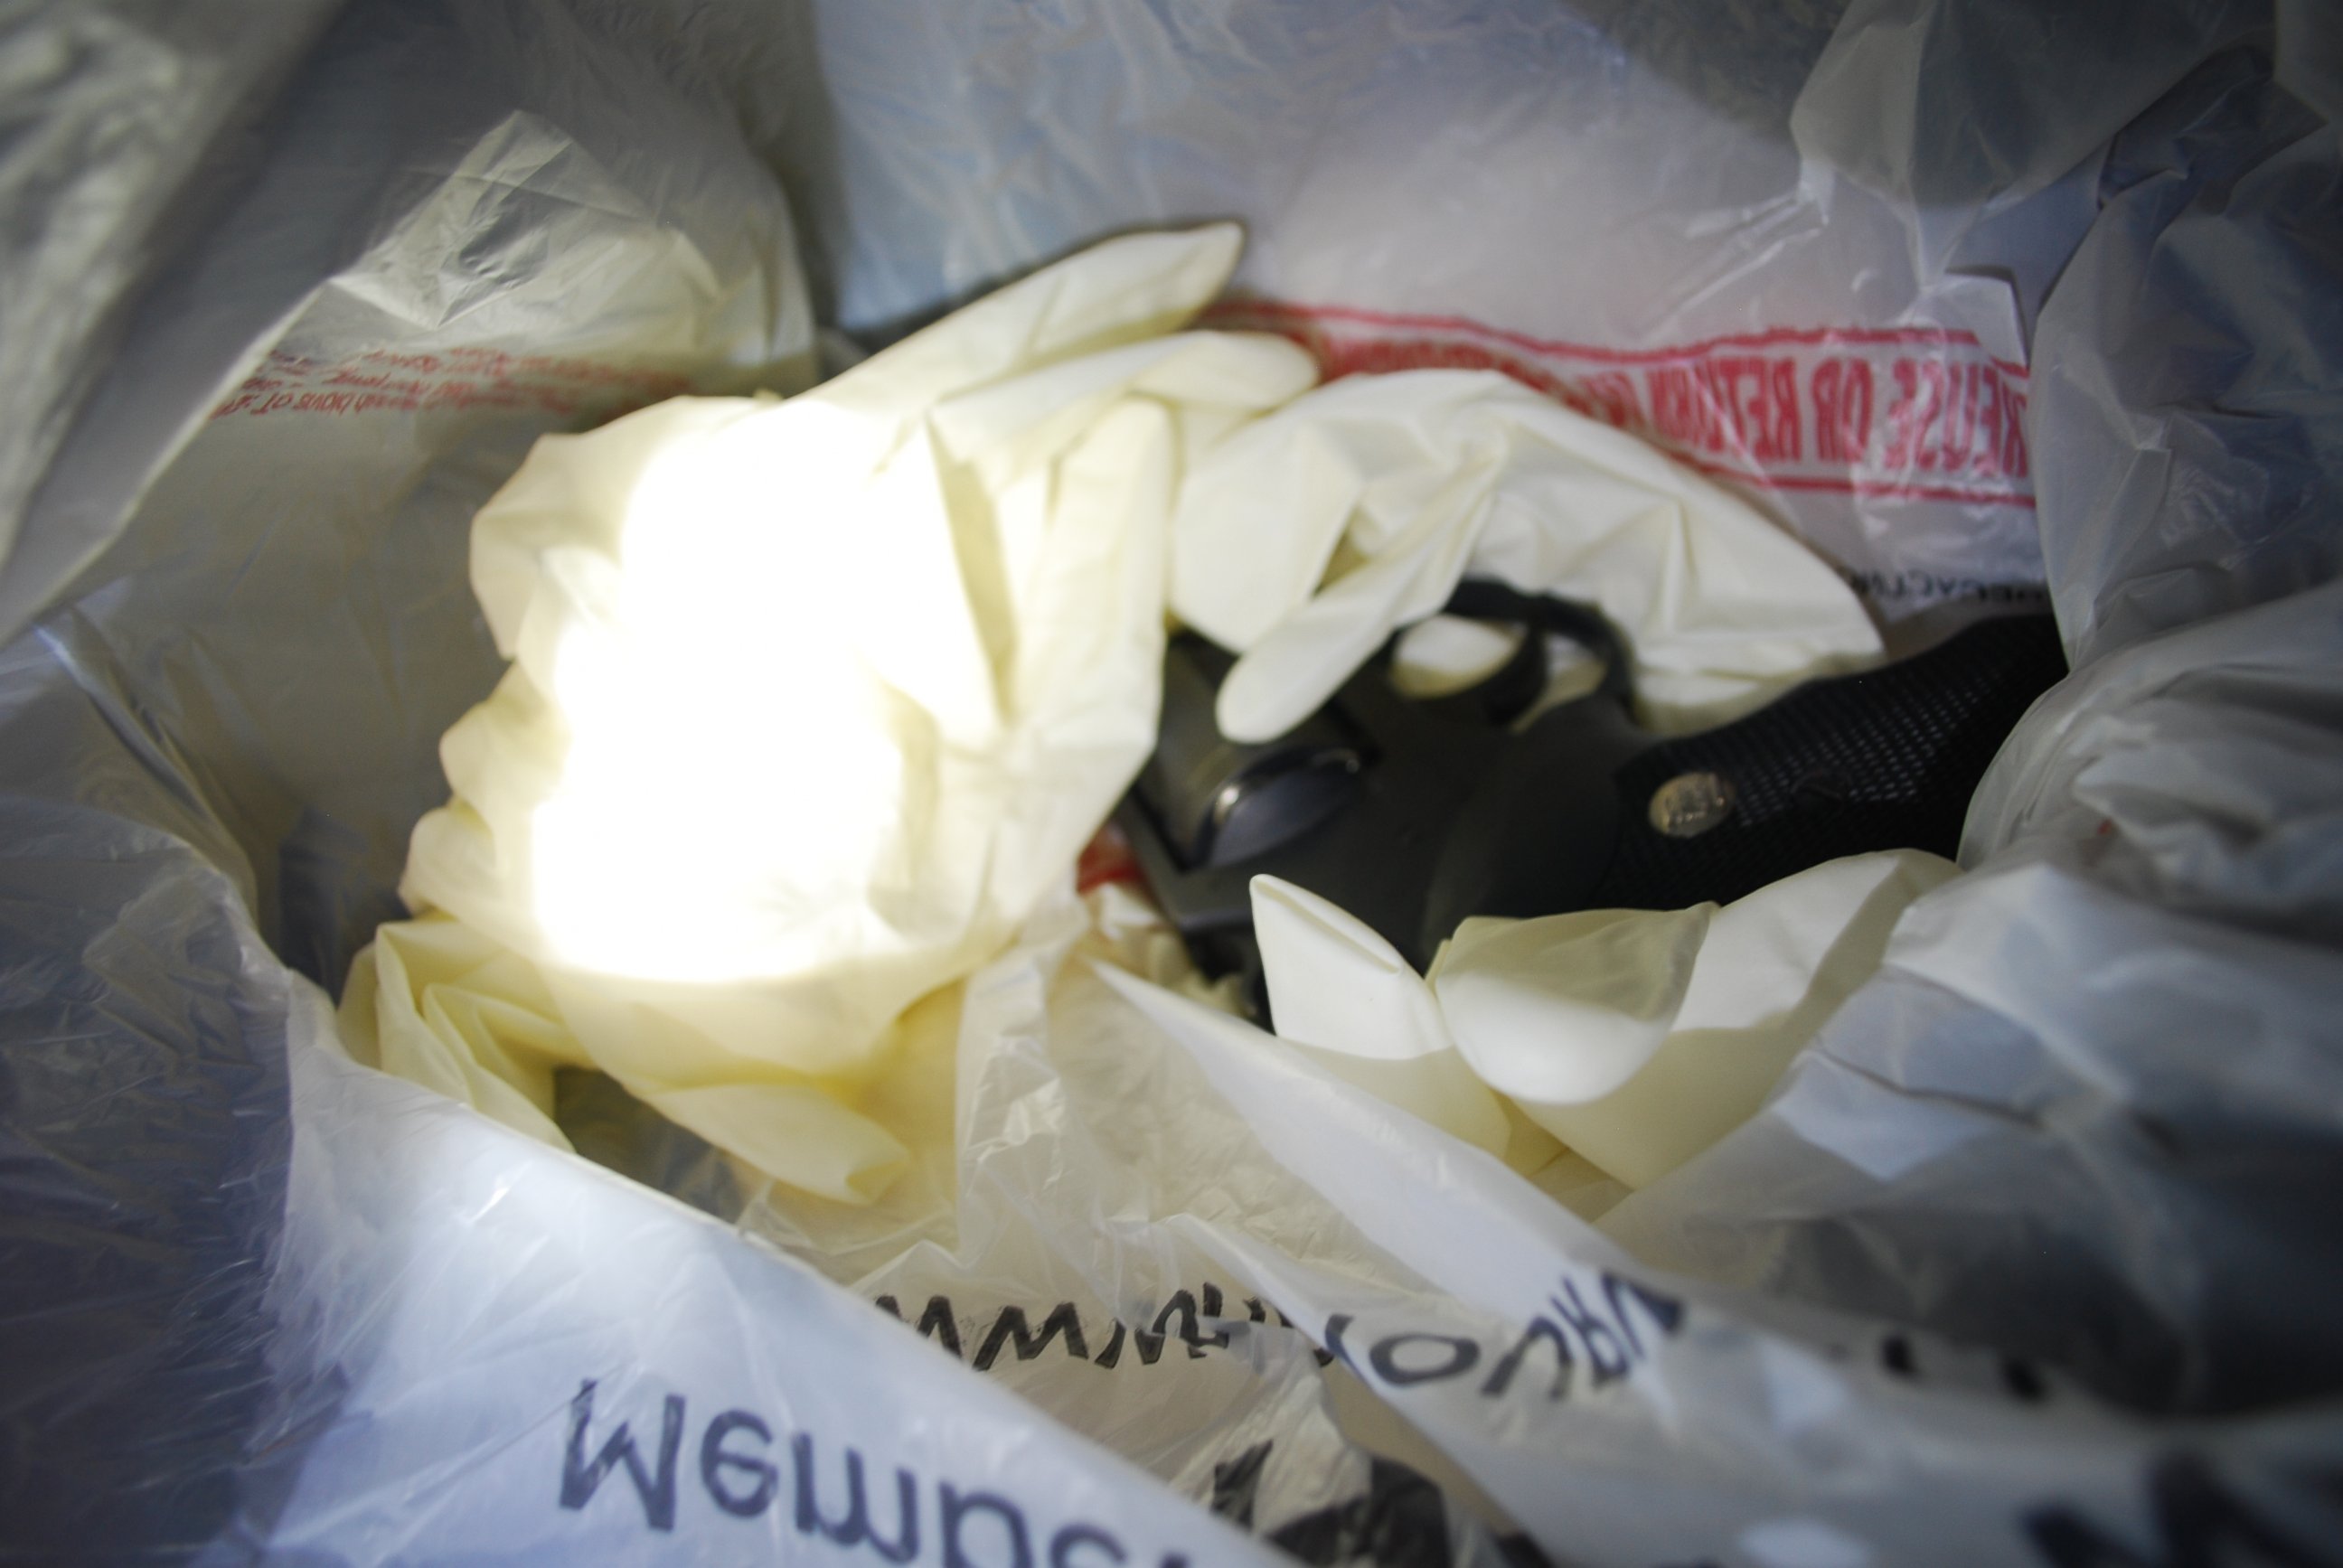 PHOTO: Police found this bag of rubber gloves and a gun in the garage of the rental home Dr. Gregory Konrath and Joannah shared.